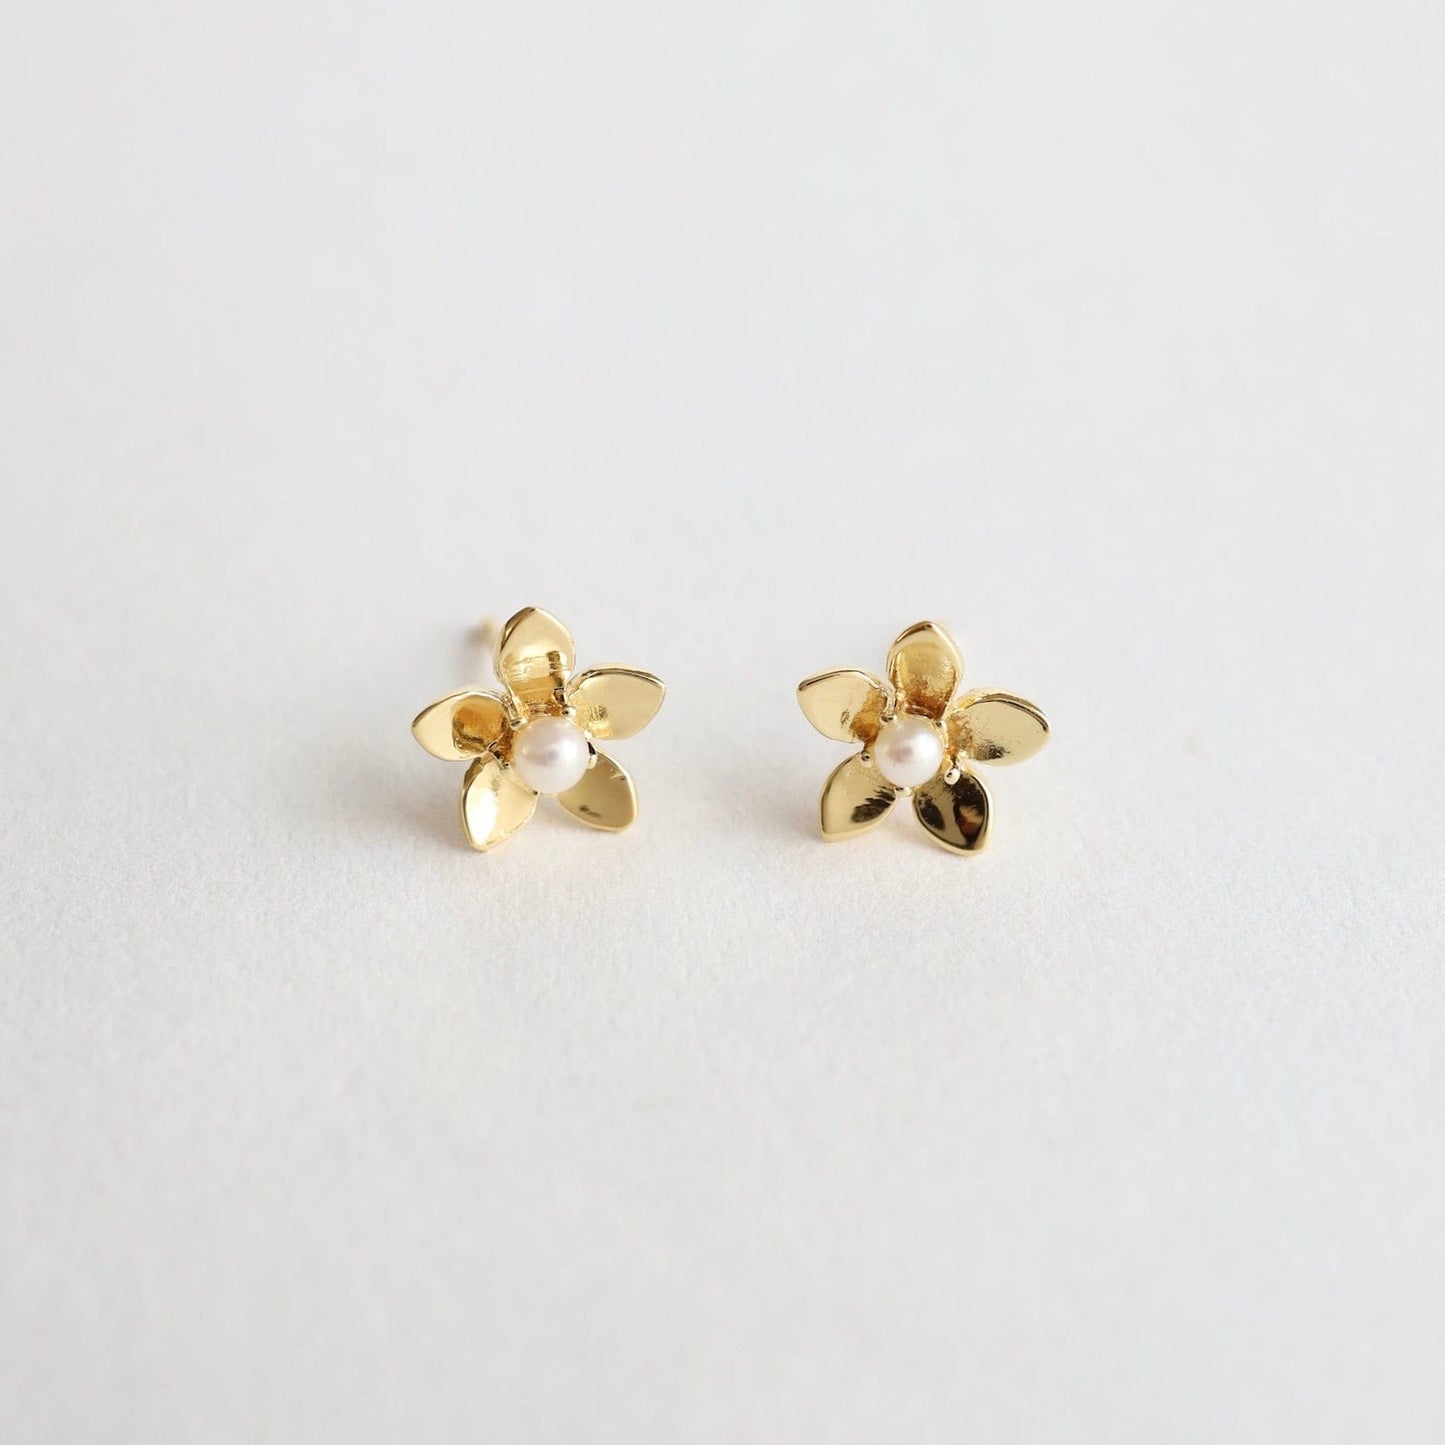 EAR-VRM Flower Stud with Tiny Pearl Center in Gold Vermeil